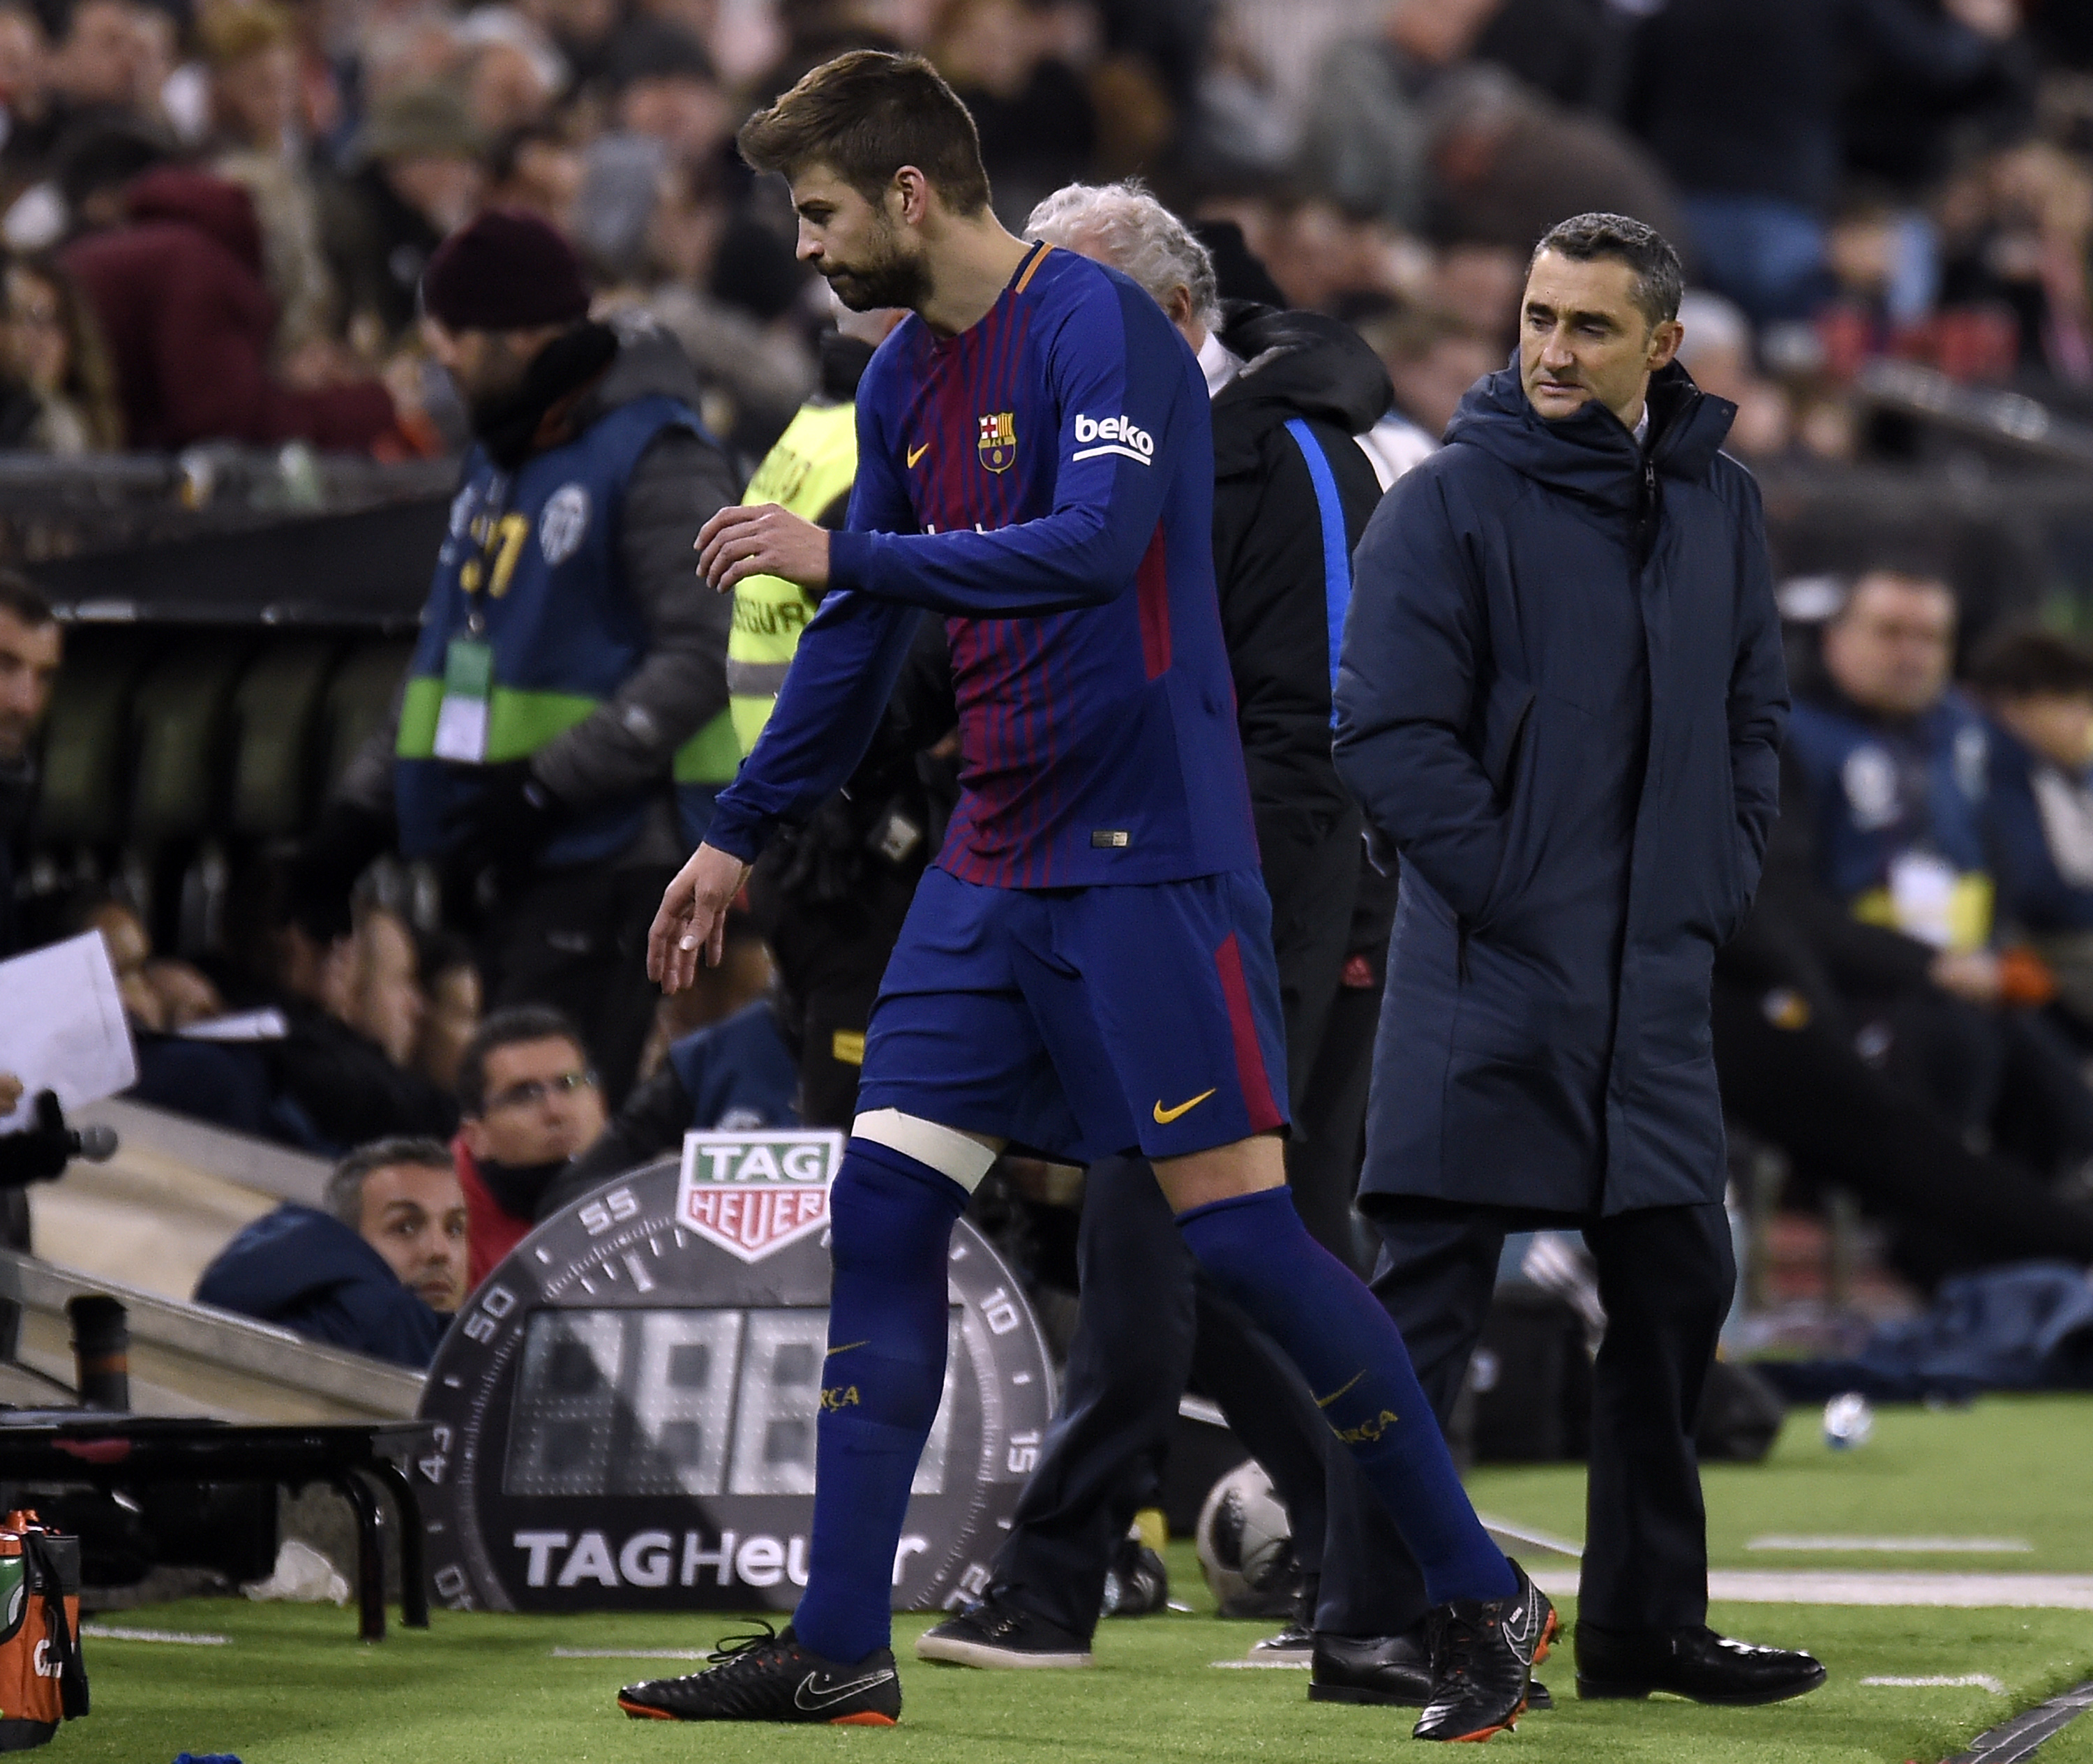 Barcelona's Spanish defender Gerard Pique (L) walks past Barcelona's Spanish coach Ernesto Valverde (R) as he leaves the field during the Spanish 'Copa del Rey' (King's cup) second leg semi-final football match between Valencia CF and FC Barcelona at the Mestalla stadium in Valencia on February 8, 2018. / AFP PHOTO / JOSE JORDAN        (Photo credit should read JOSE JORDAN/AFP/Getty Images)